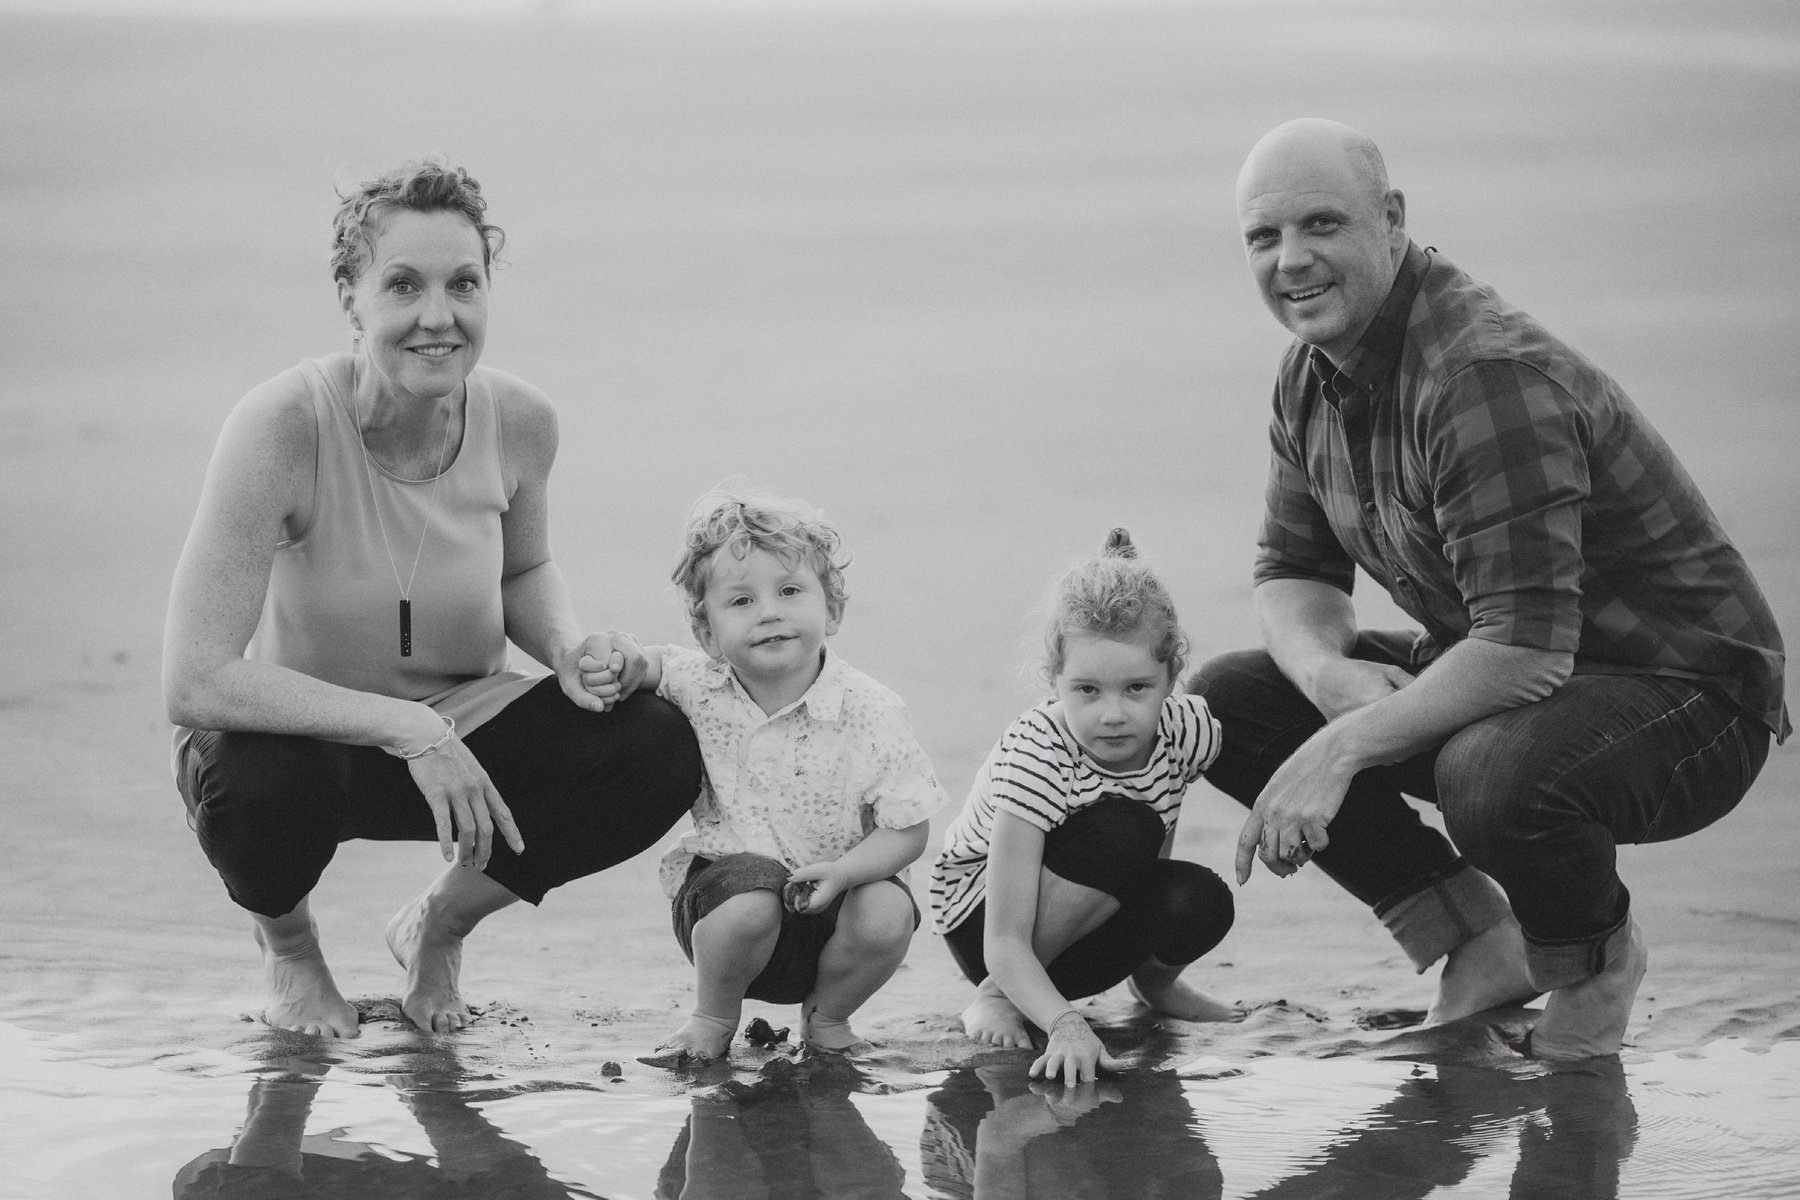  Natural and un-posed family portraits by Jenny Siaosi Photography, in Wellington, NZ.  